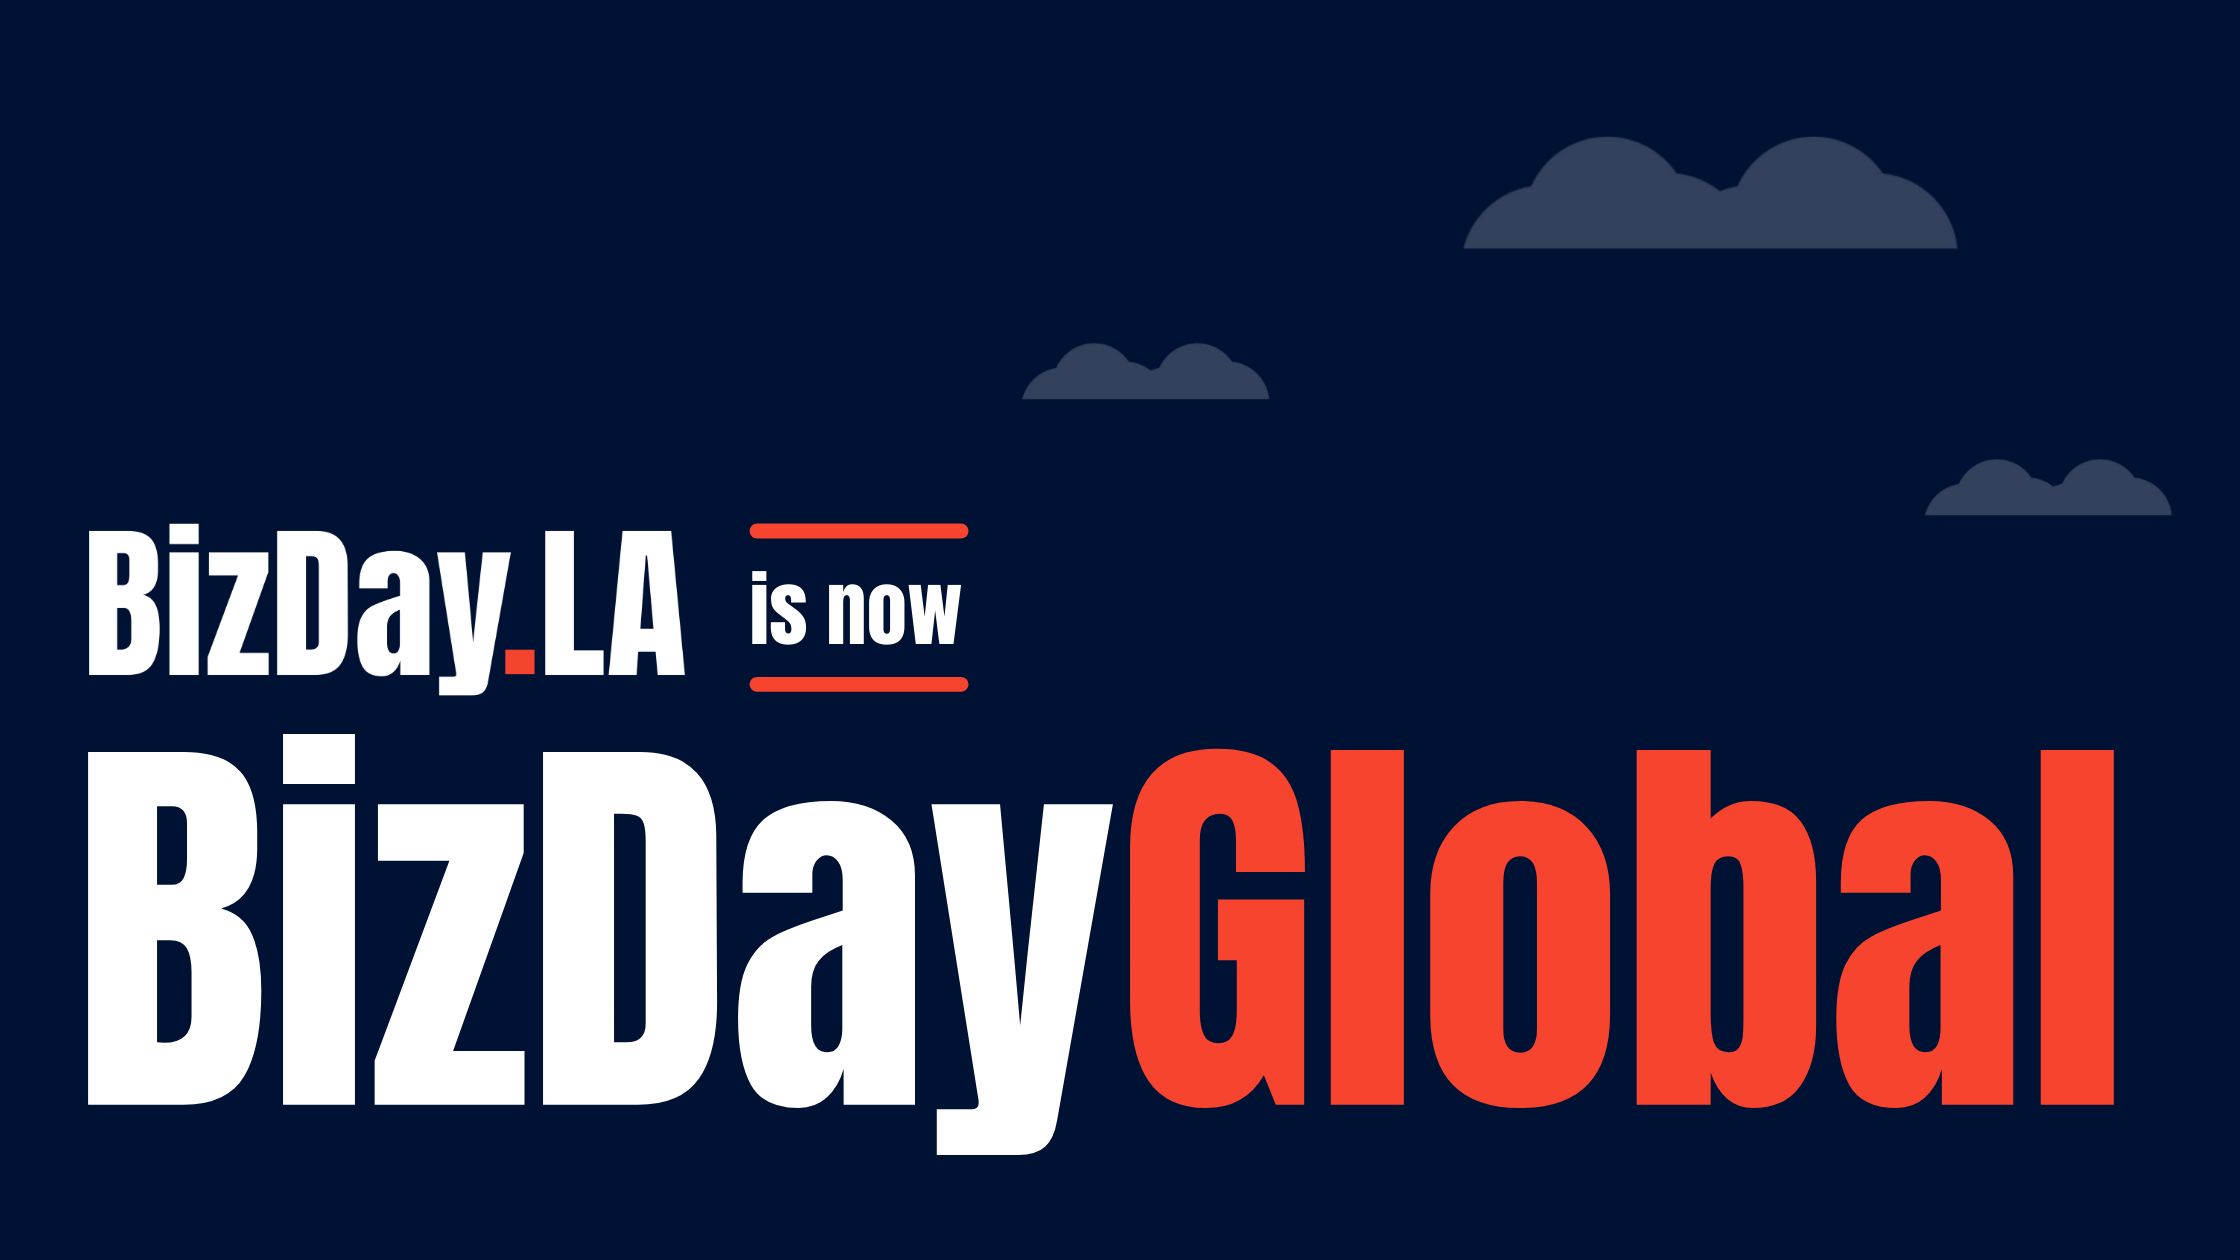 BizDay.LA is now BizDayGlobal. Biz Day Global is written without spaces, as in BizDayGlobal.